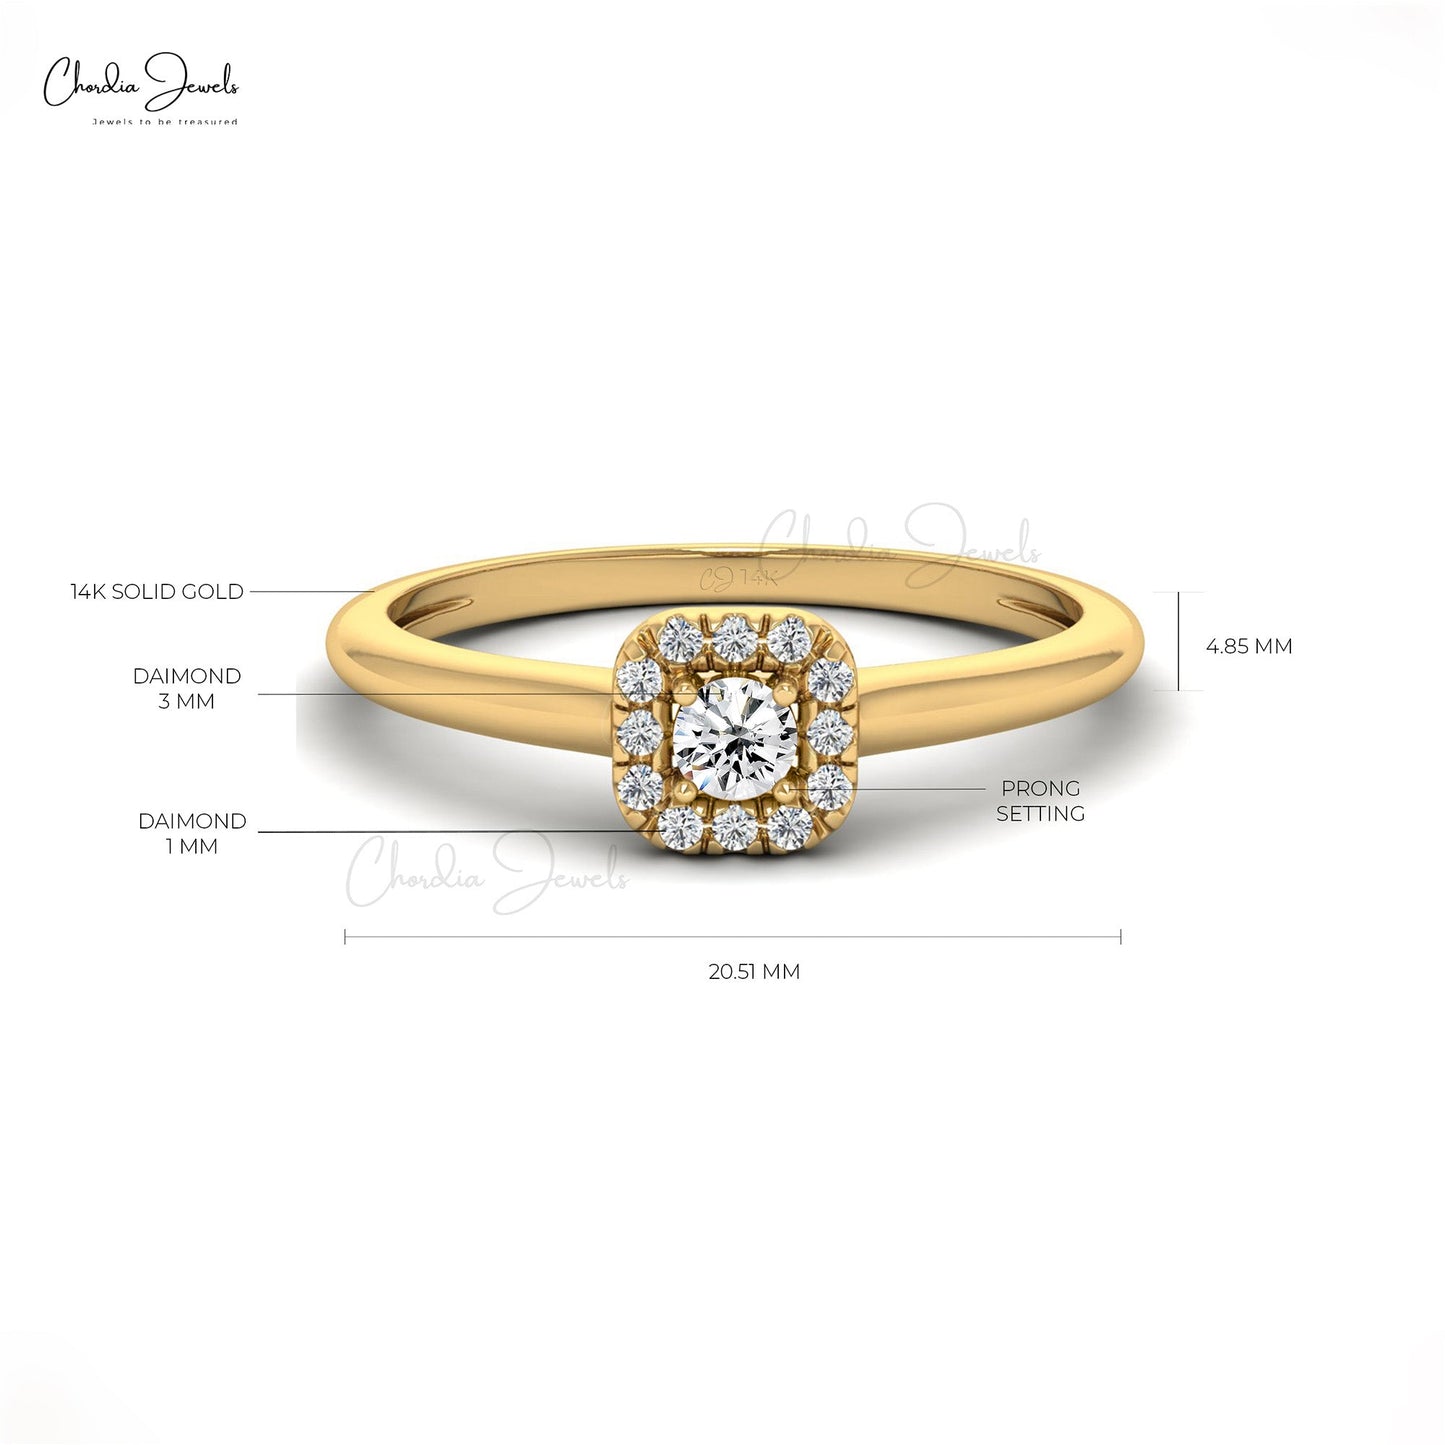 Load image into Gallery viewer, 14K Solid Gold Diamond Anniversary Ring, 0.16 Carat G-H White Diamond Wedding Ring For Women, 3mm Round Cut Wedding Ring (Size 5-11)
